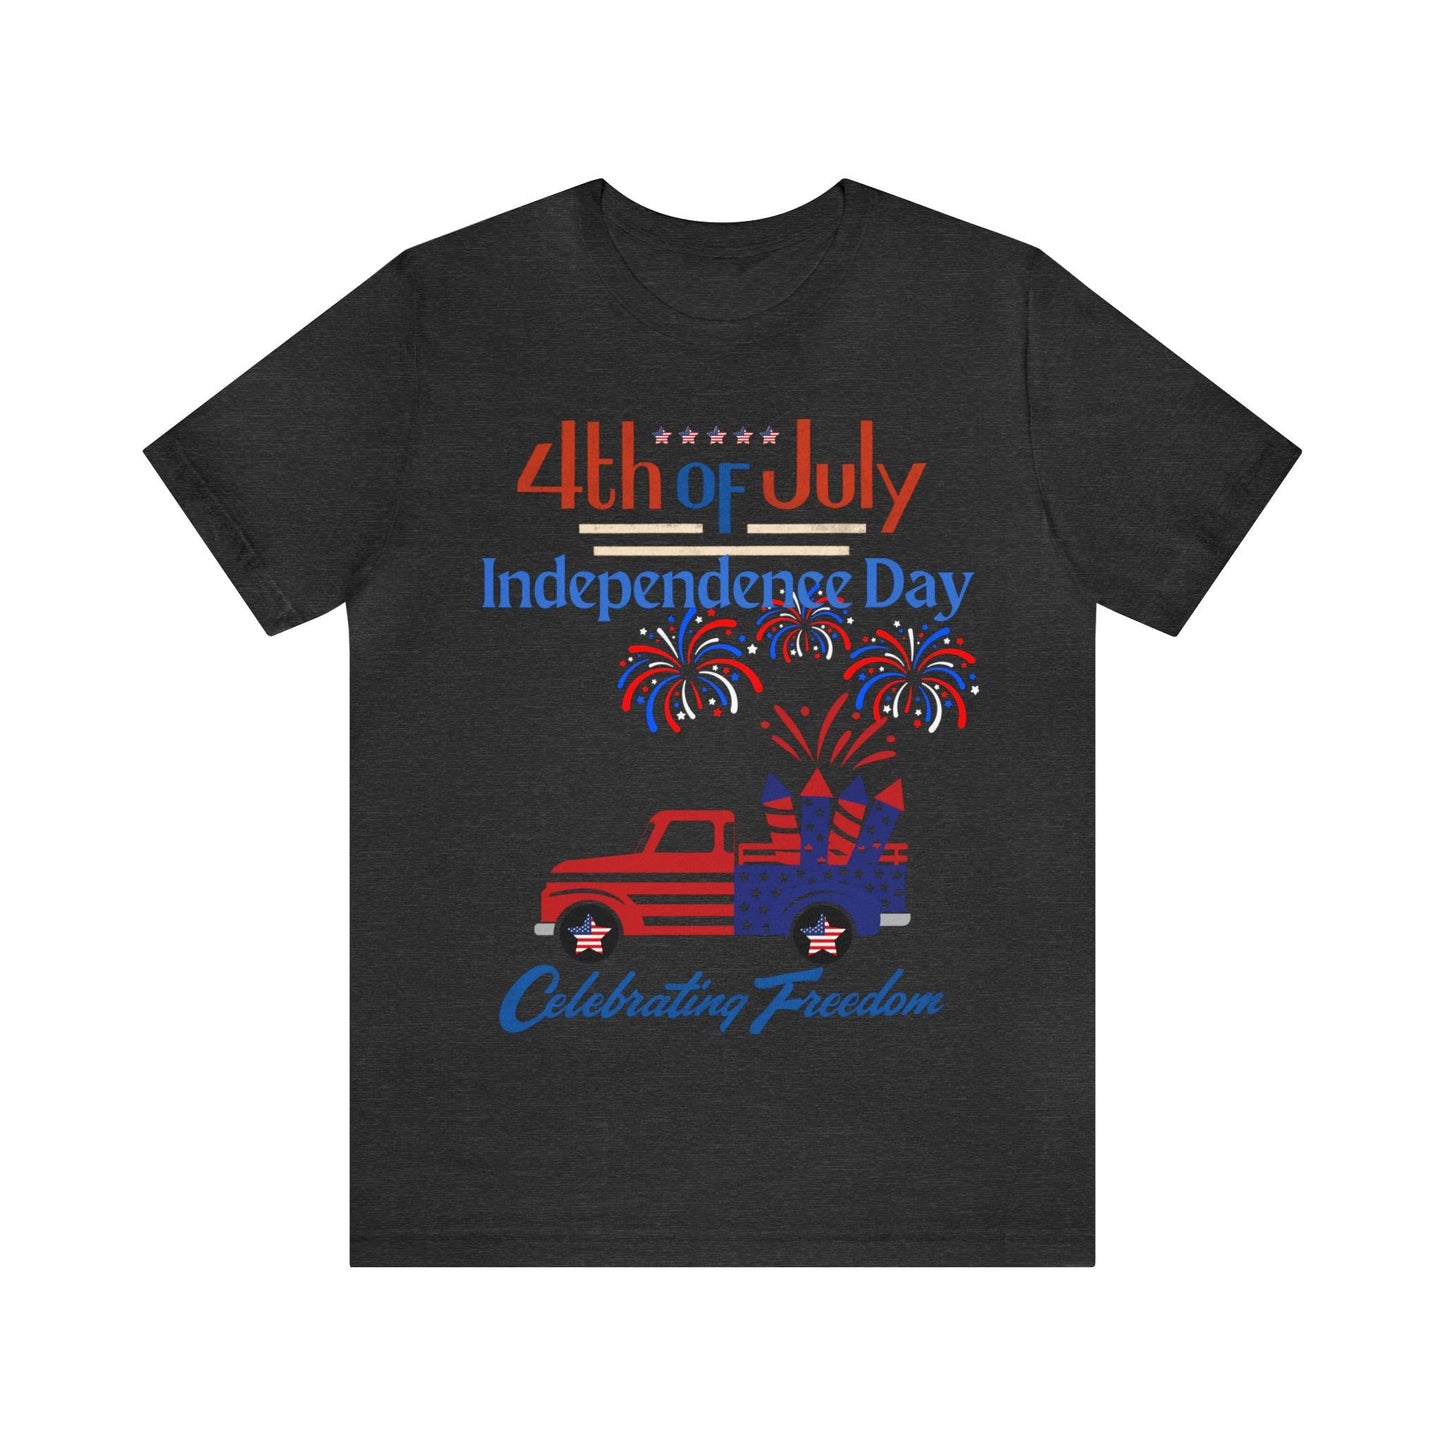 Celebrate Independence with our Patriotic Freedom Shirt! Men and Women's 4th of July Shirt featuring USA Flag, Fireworks, and Joyful Spirit!" - Giftsmojo